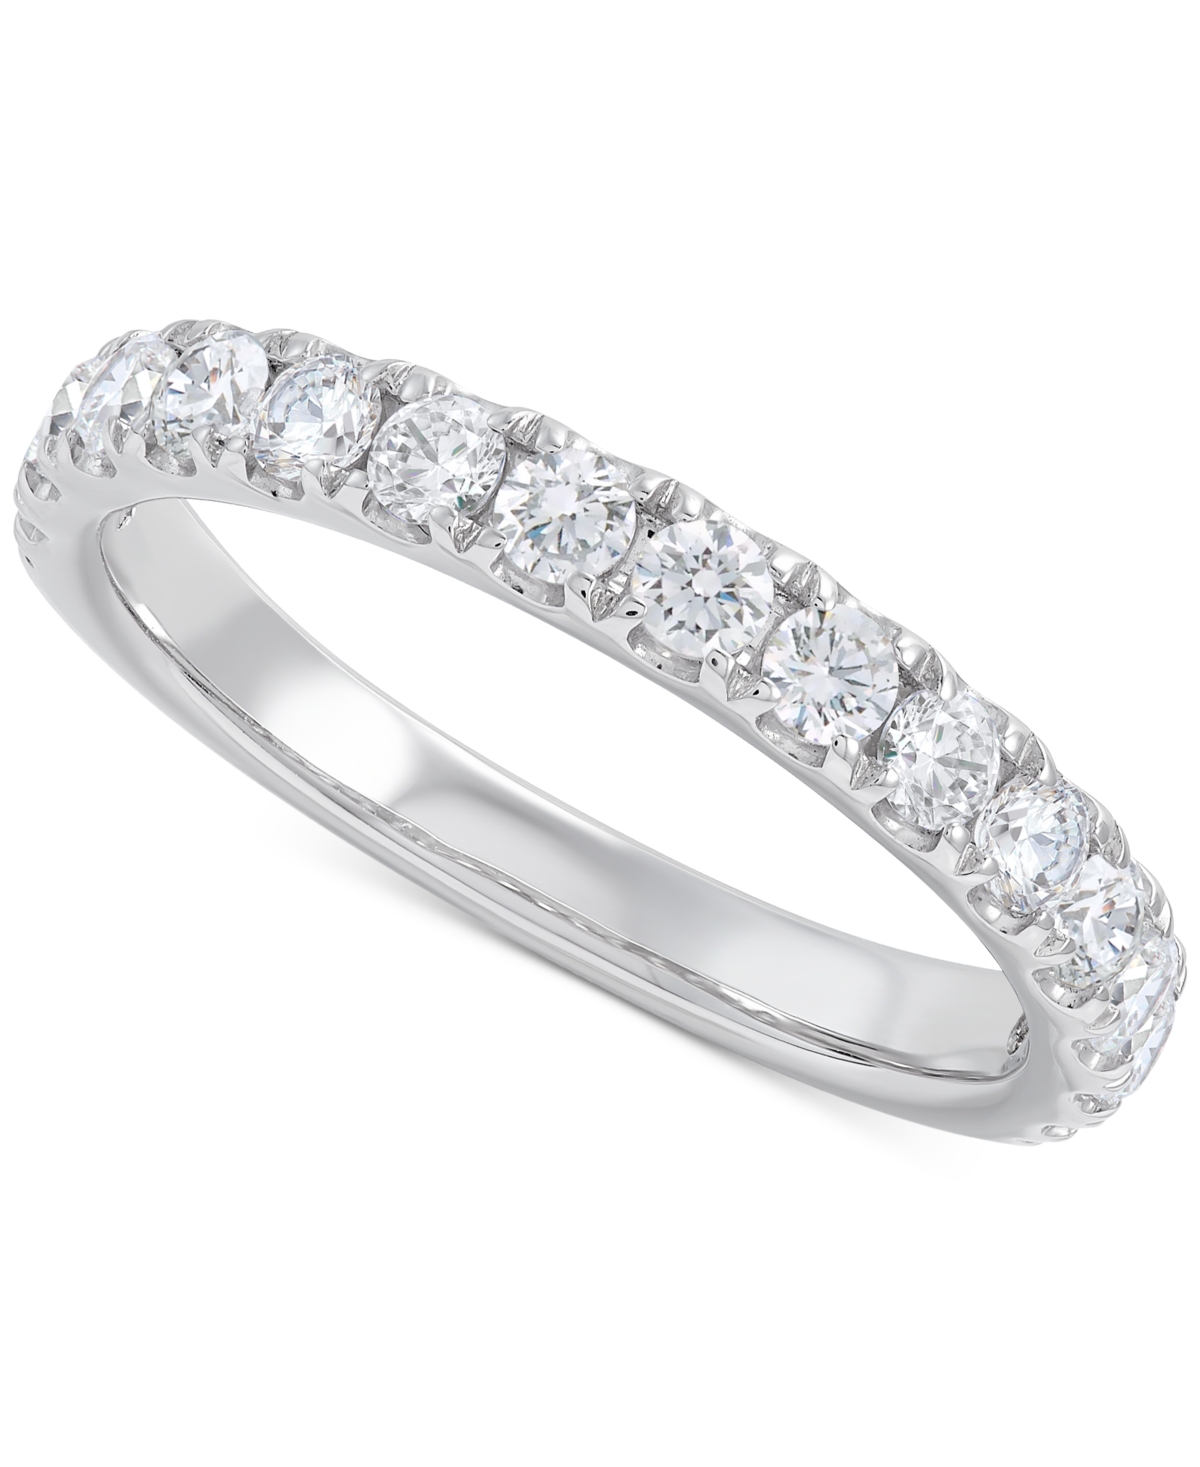 Grown With Love Igi Certified Lab Grown Diamond Band (3/4 ct. t.w.) in 14k White Gold